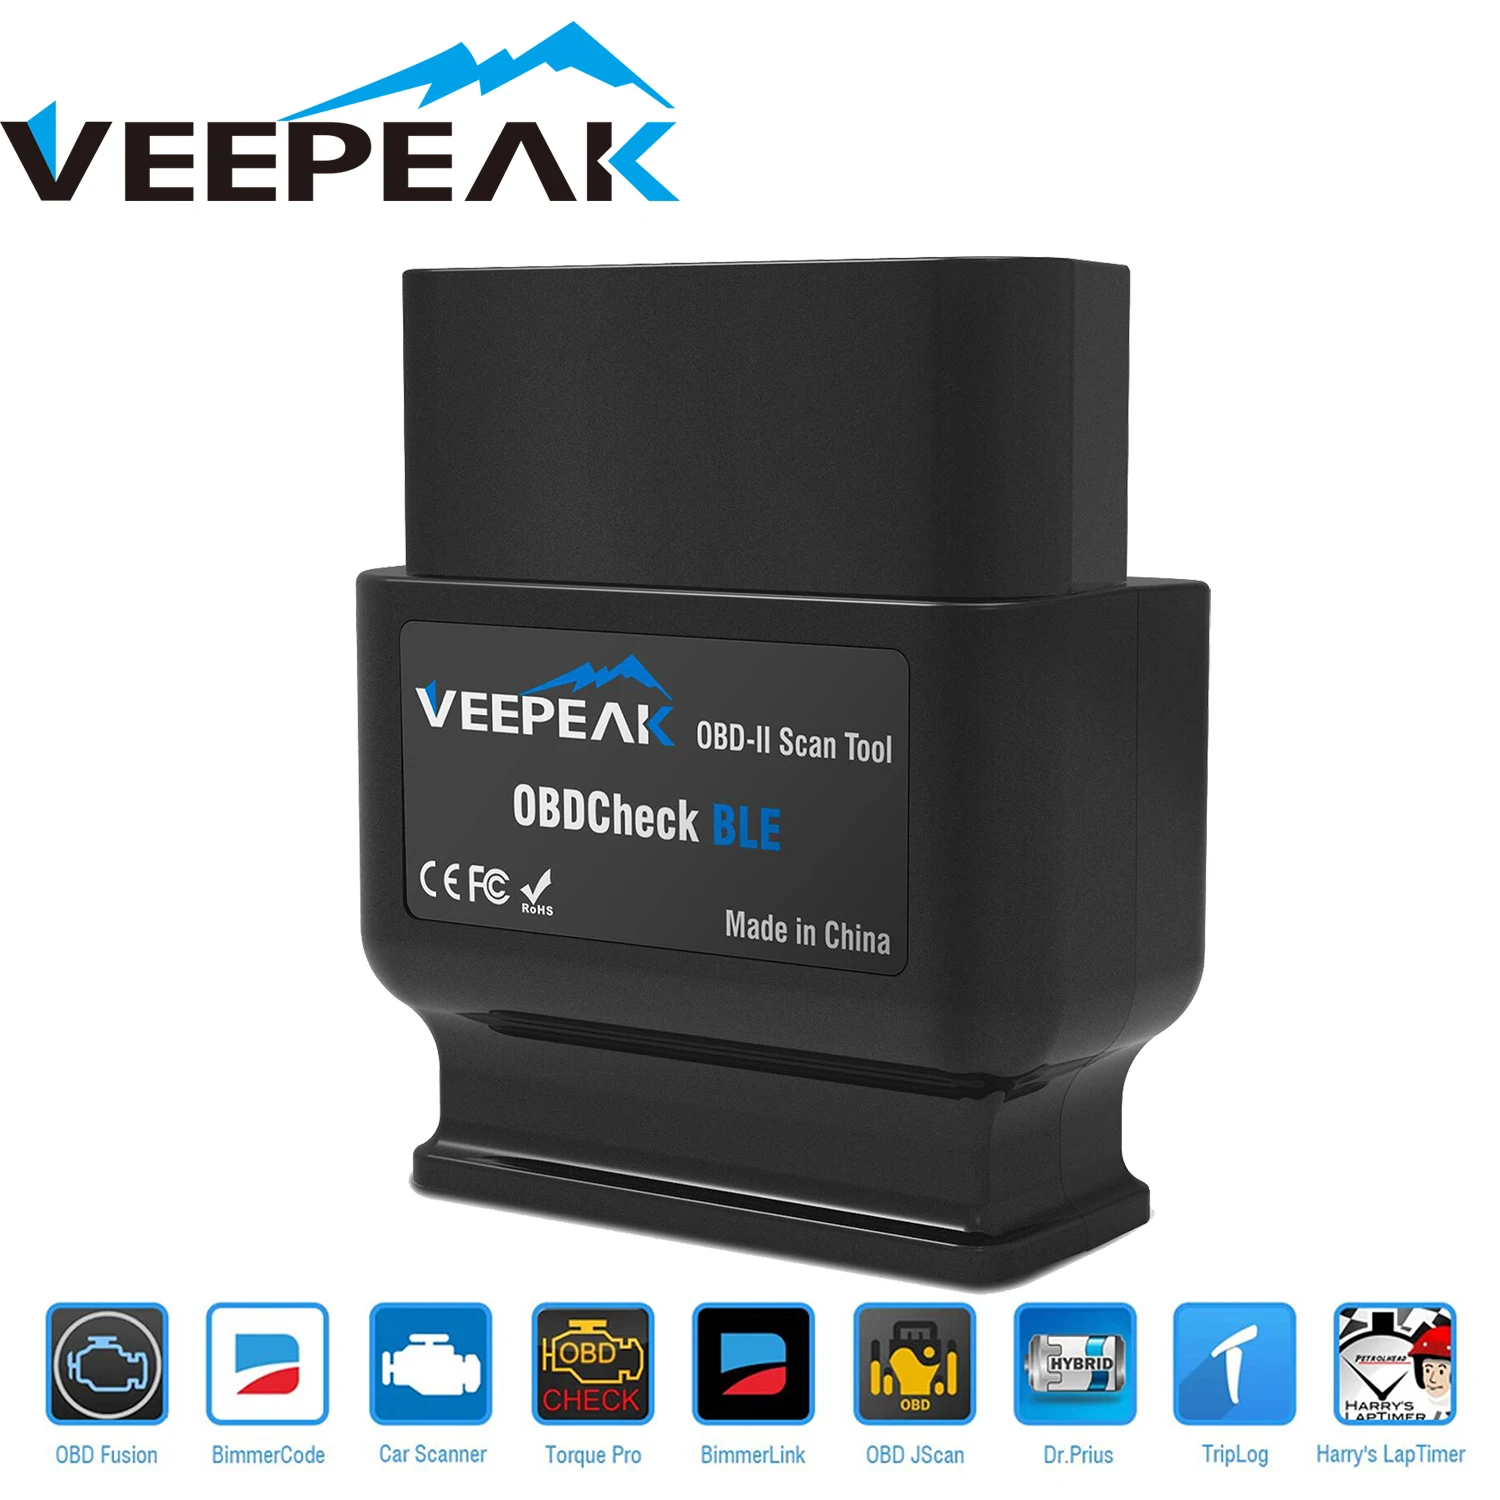 Veepeak OBDCheck BLE OBD2 Bluetooth Scanner Auto OBD II Diagnostic Scan Tool for iOS & Android, BT4.0 Car Check Engine roadwsie elm327 obd2 scanner 2 1 bluetooth compatible for android torque obdii scan tool mini code reader obd2 car repair tools